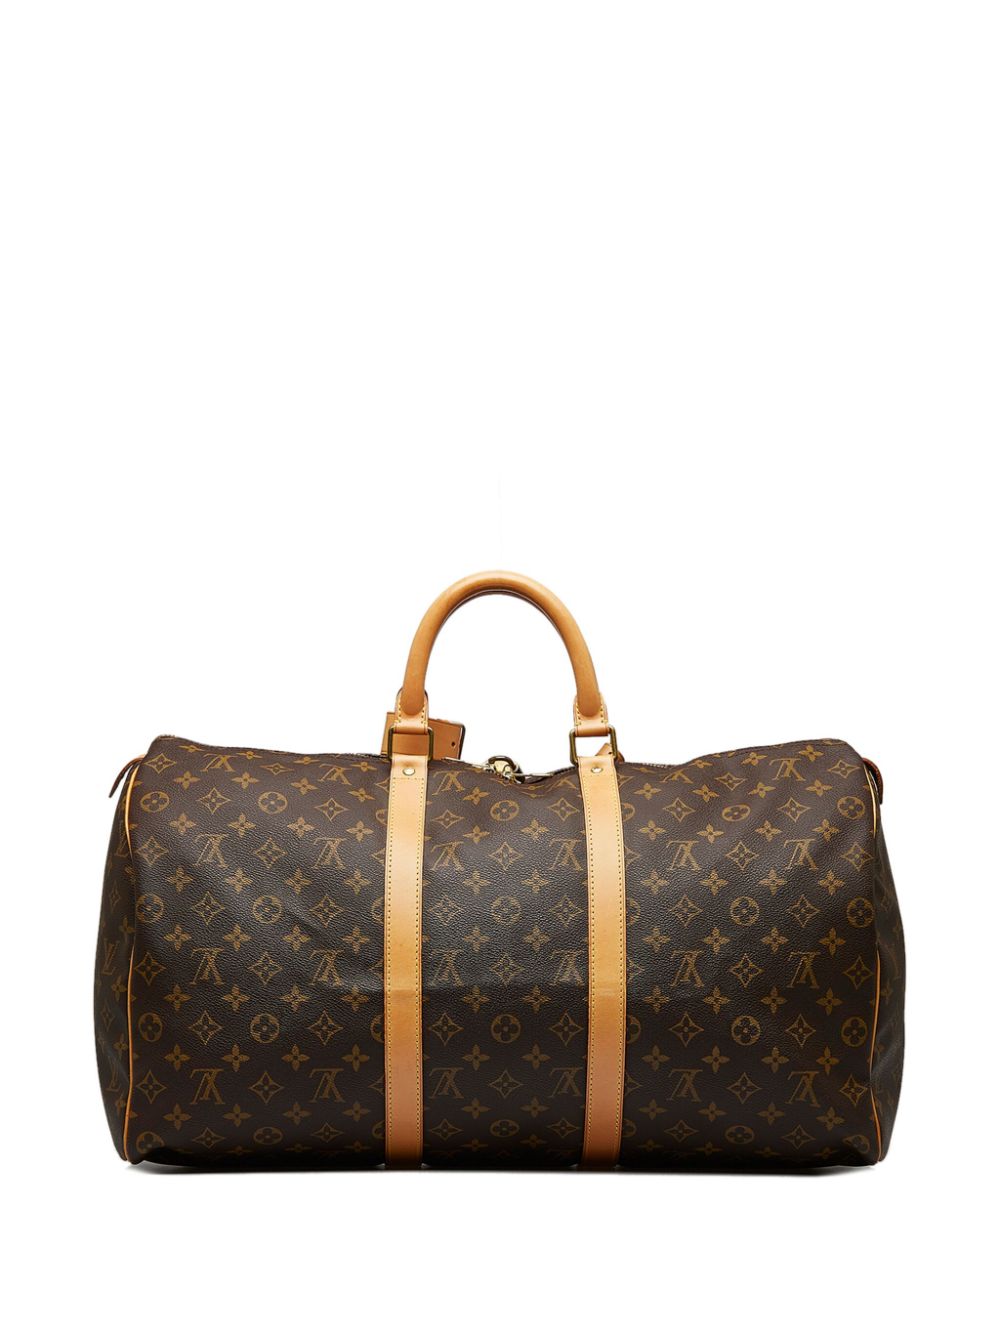 Louis Vuitton 2000 pre-owned Keepall 50 travel bag - Bruin